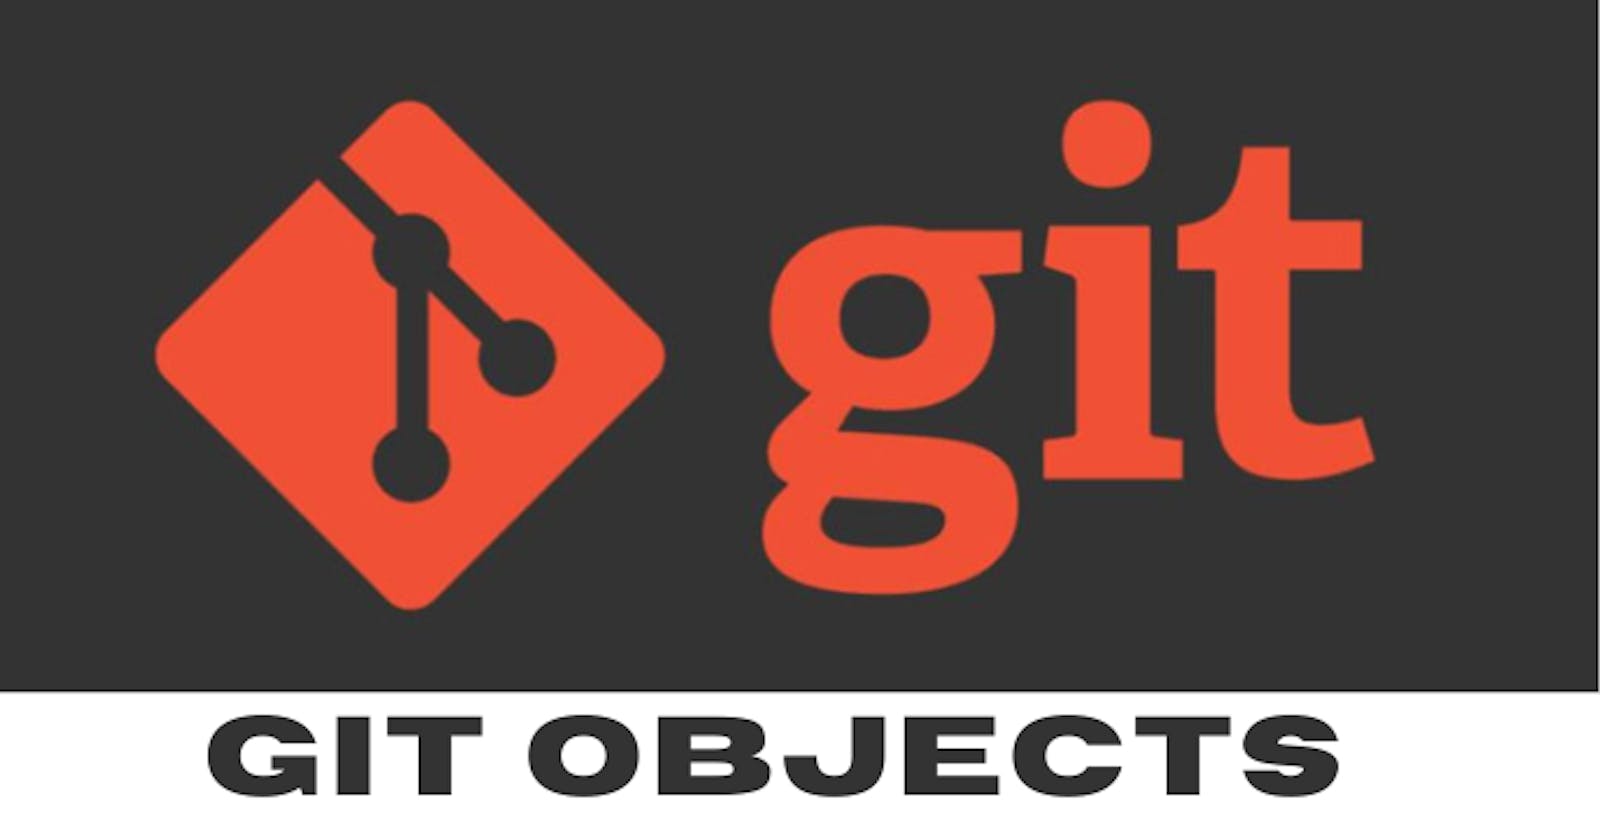 Git Objects 101: The Fundamentals of Git's Internal Architecture (Part 1 of 3)